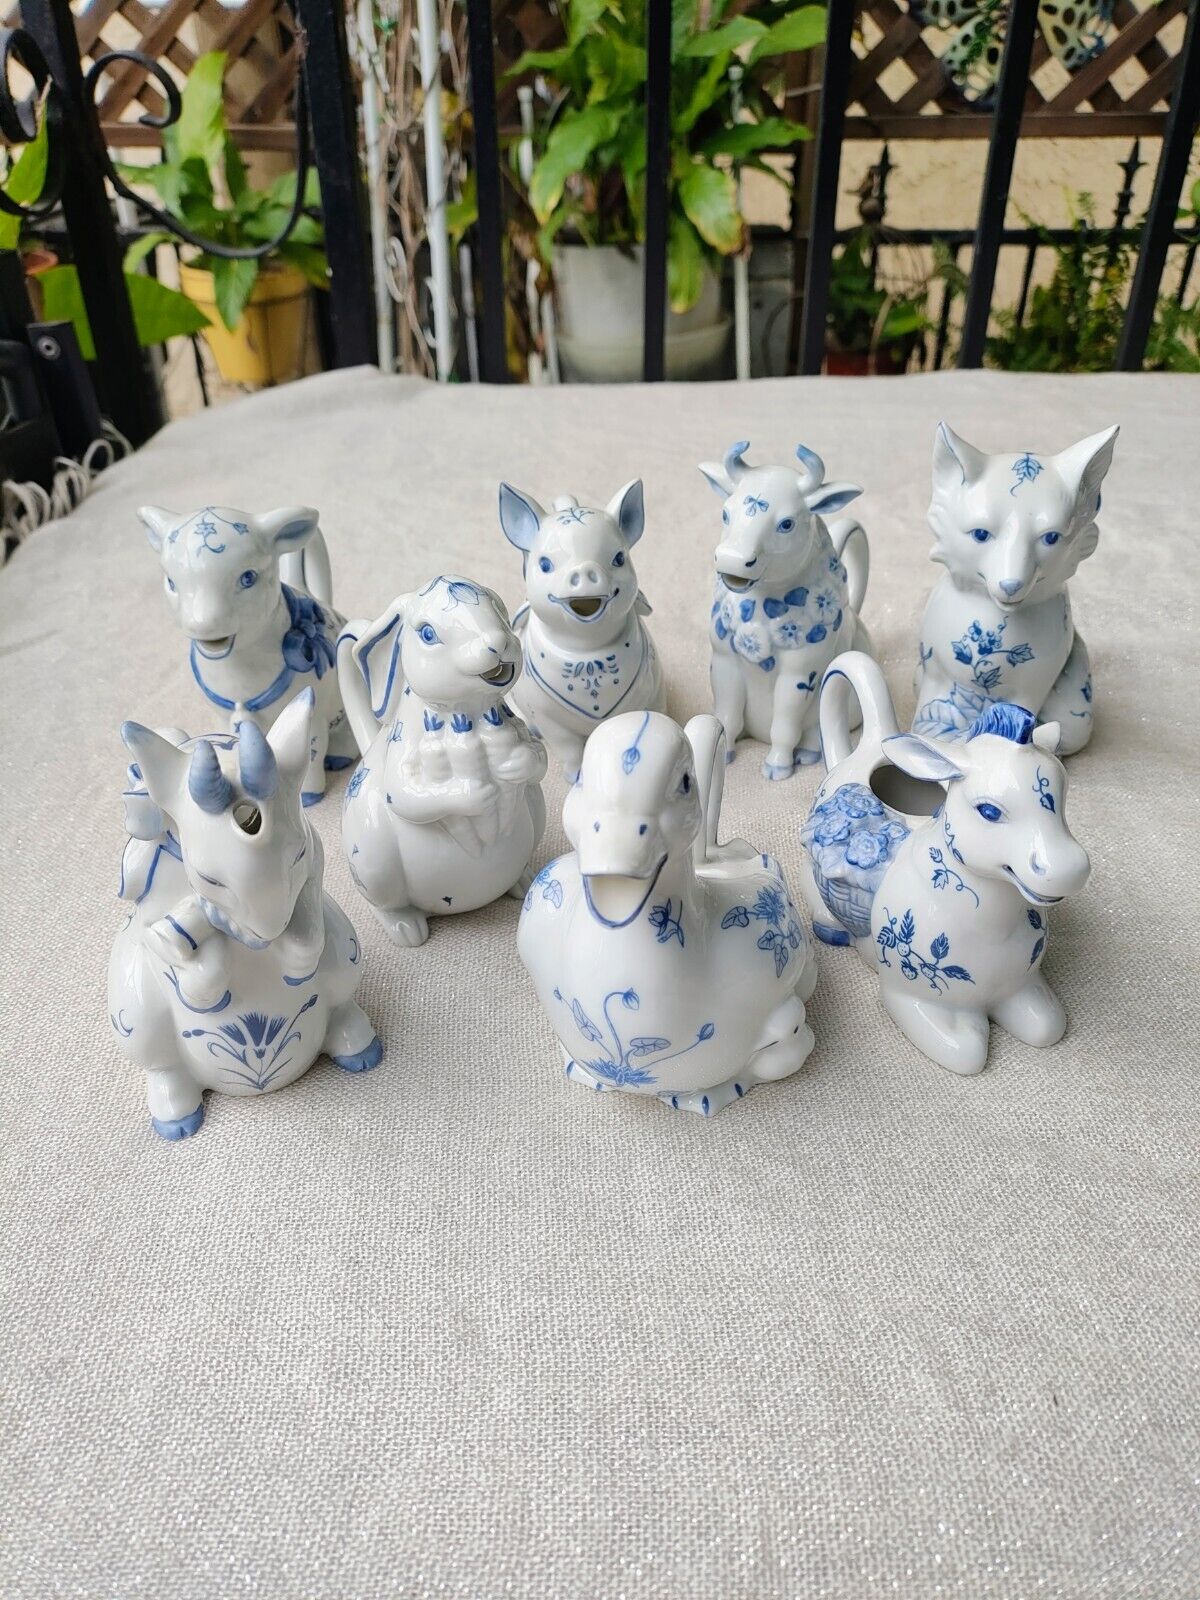 Set of 9 Country Friends 1986 Franklin Mint  Animal Creamers By Hallie Greer